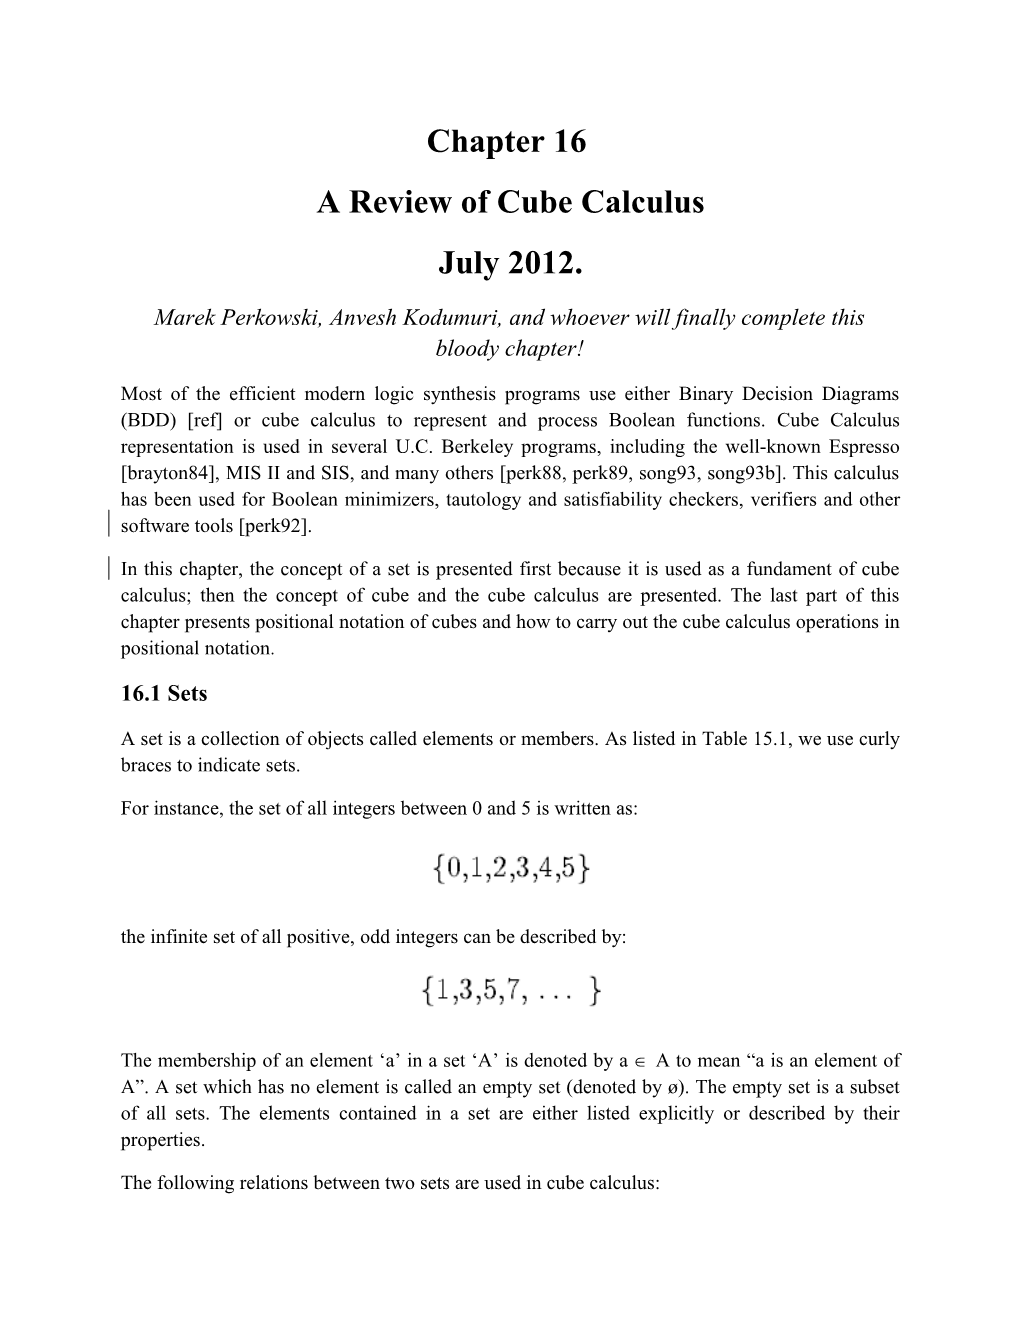 A Review of Cube Calculus